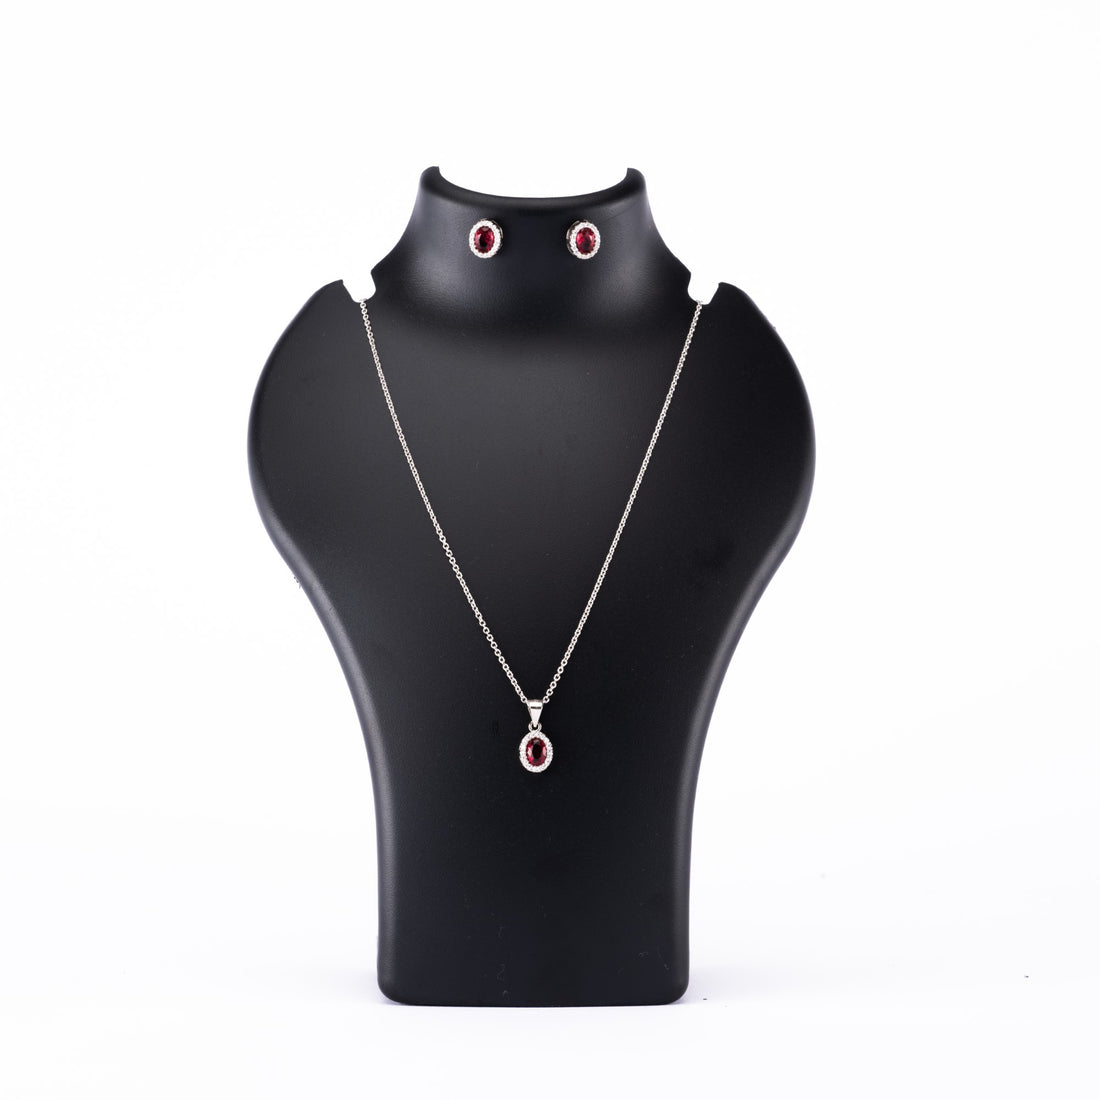 Silver Set Chain Pendant and Earrings with Red Stones for Women